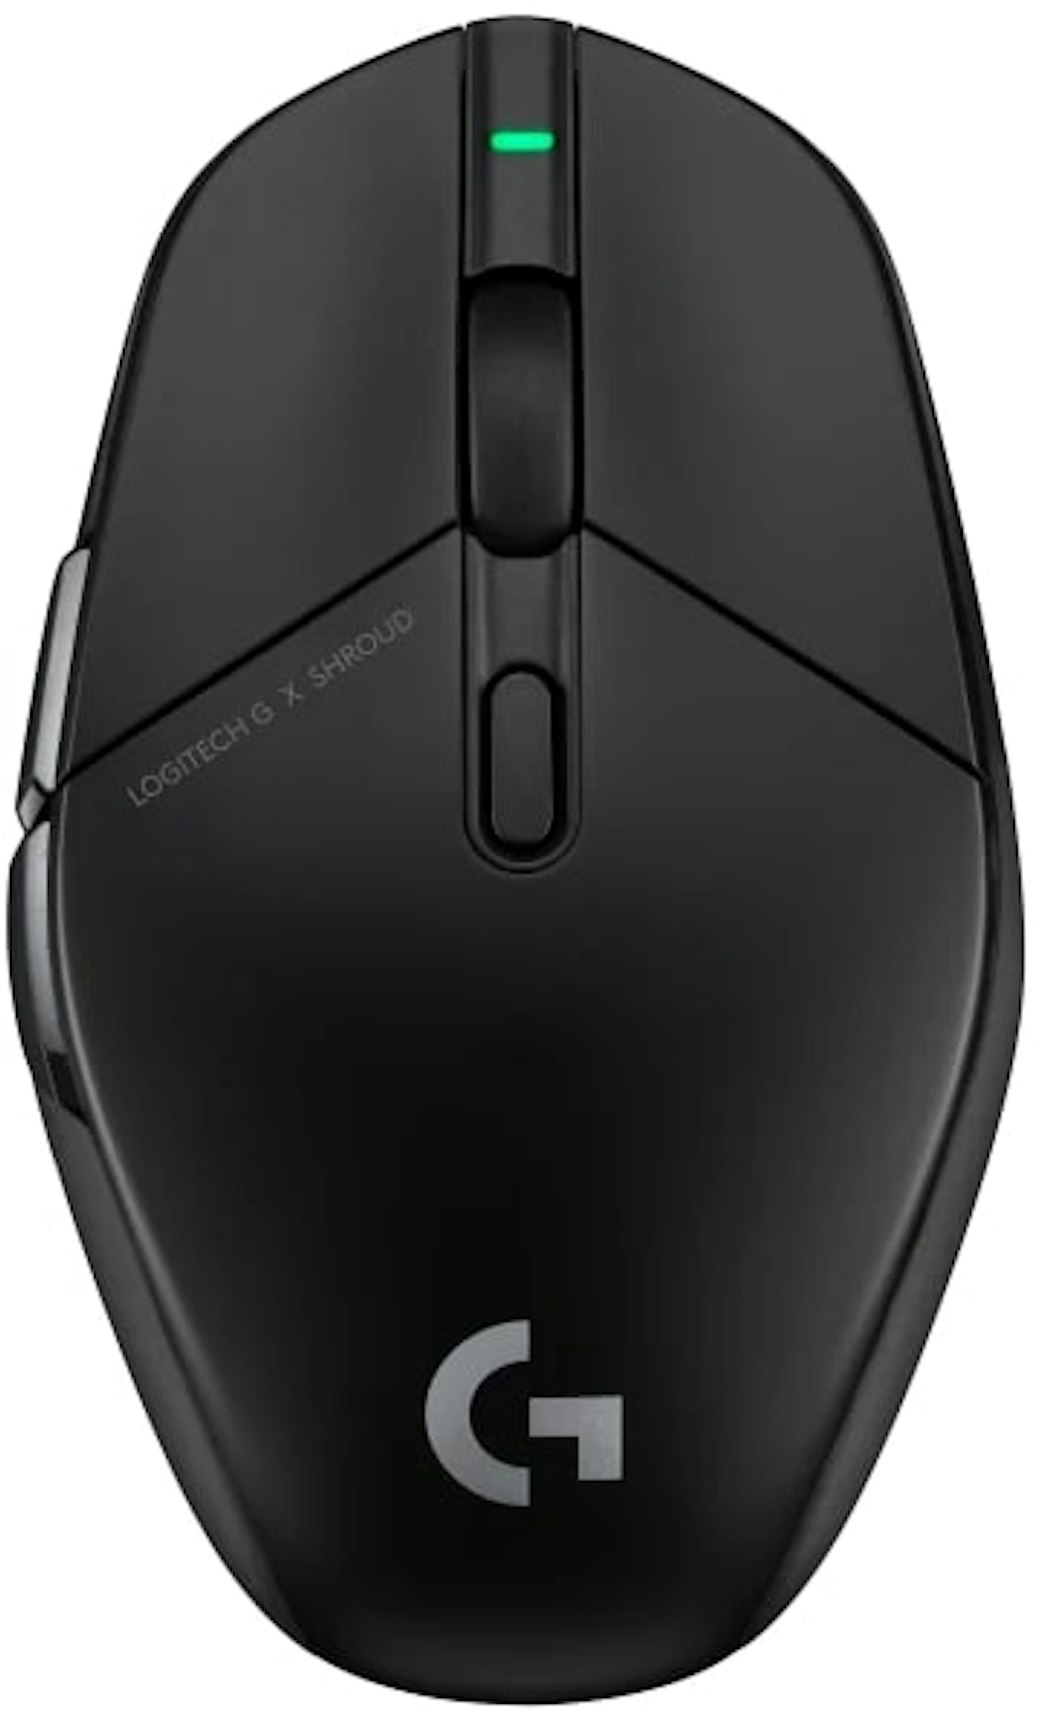 Logitech G303 Wireless Gaming Mouse - US